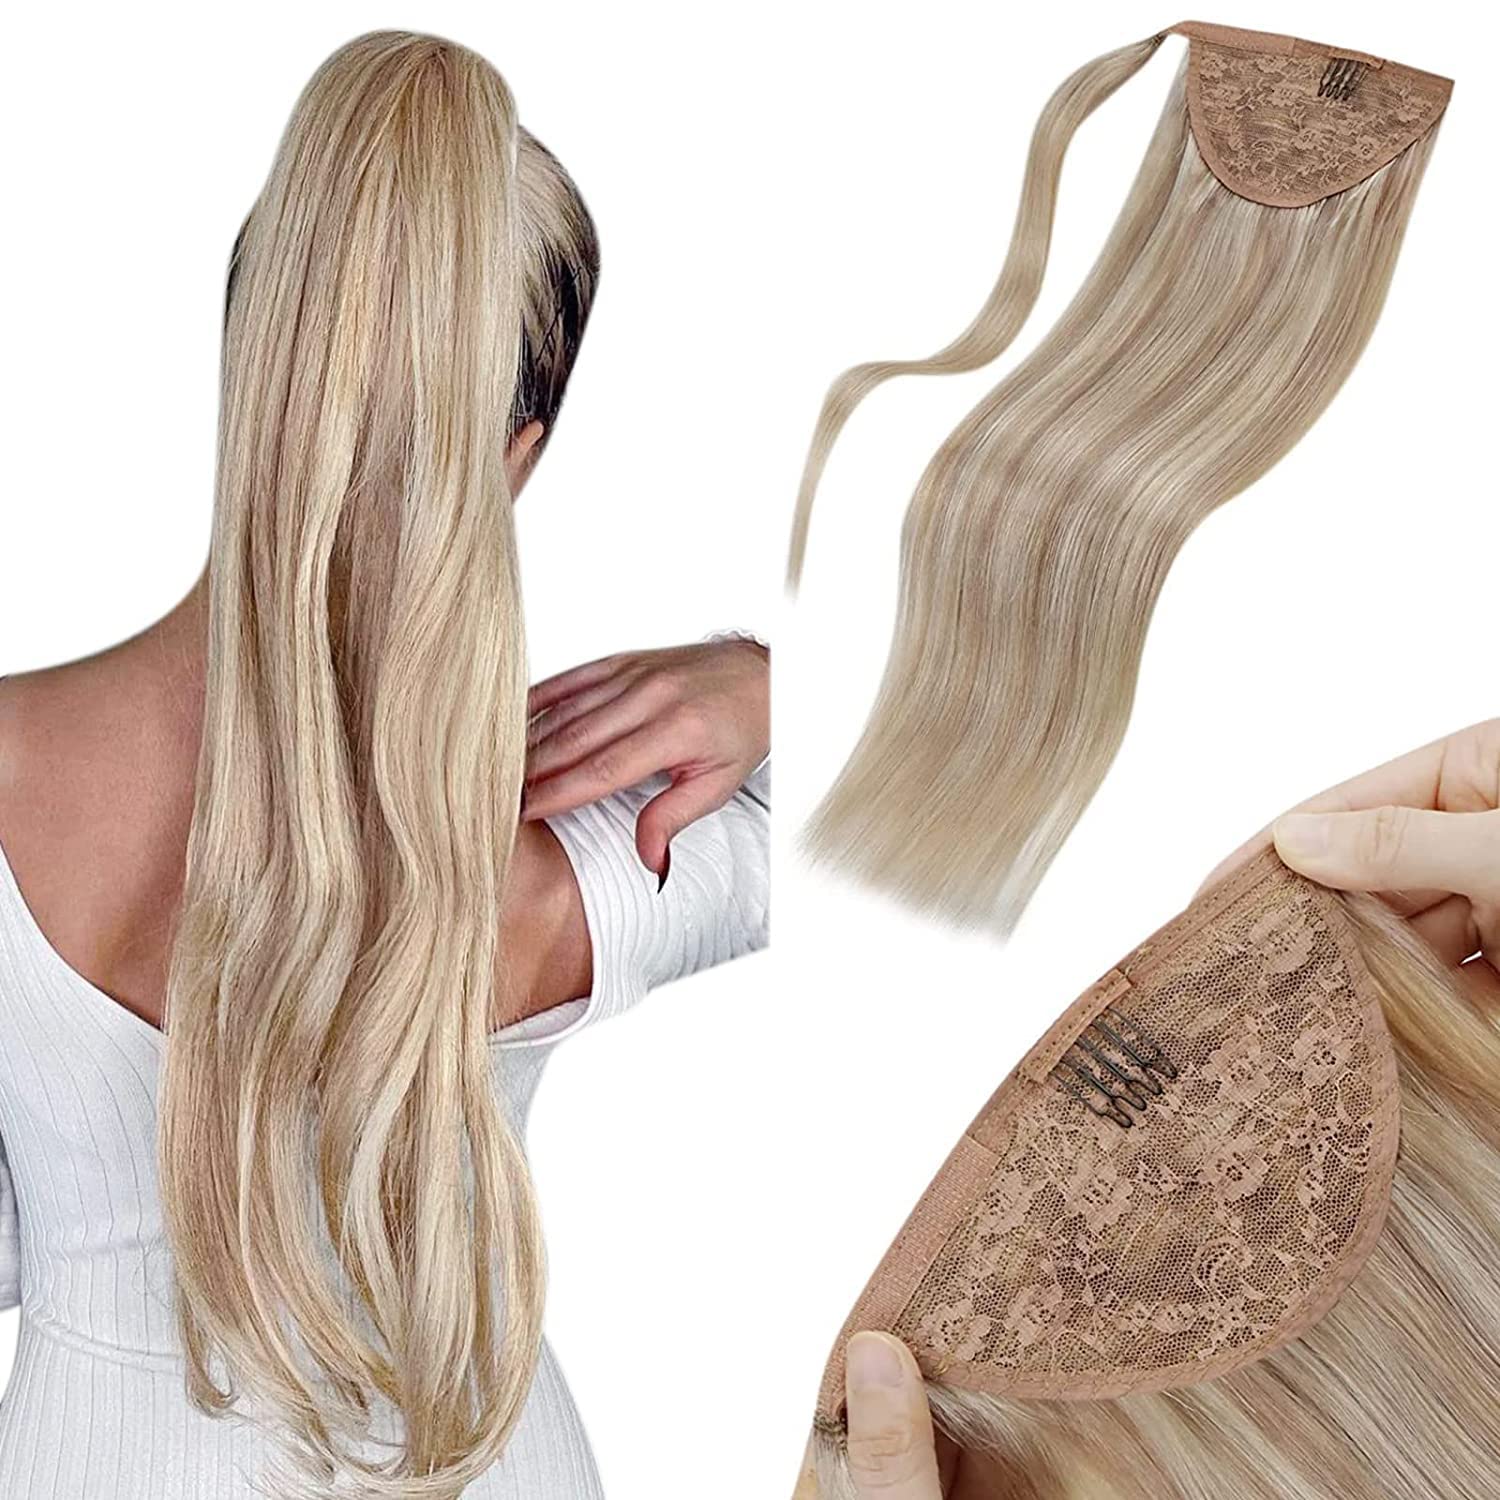 Laavoo Blonde Hair Extensions Ponytail Real Human Hair 18 Ash Blonde Mixed Light Blonde Clip In Wrap Around Ponytail Hair Extens